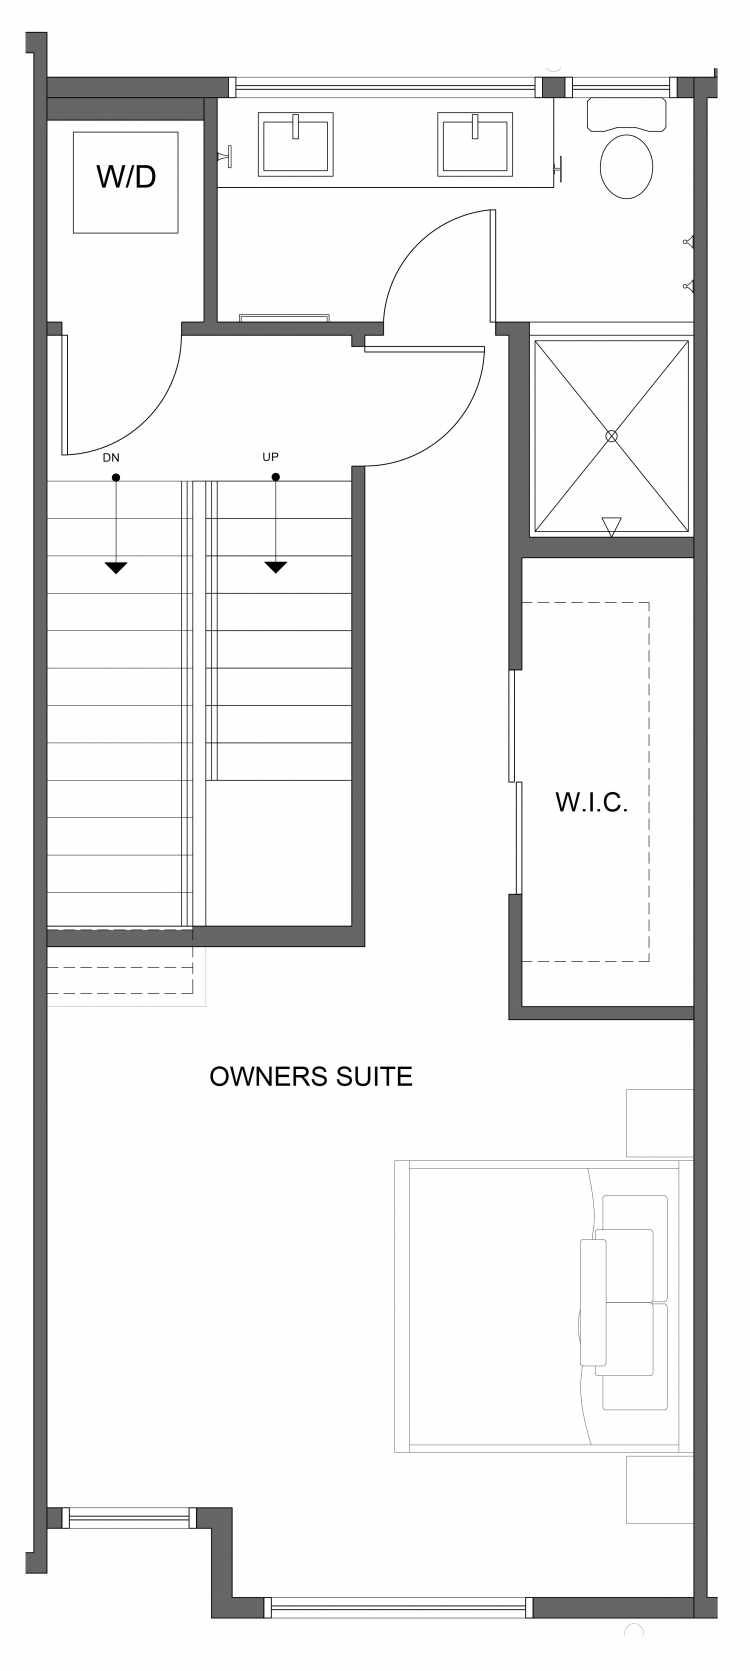 Third Floor Plan of 1030B NE 70th St, One of the Sopris on 70th Townhomes in Roosevelt